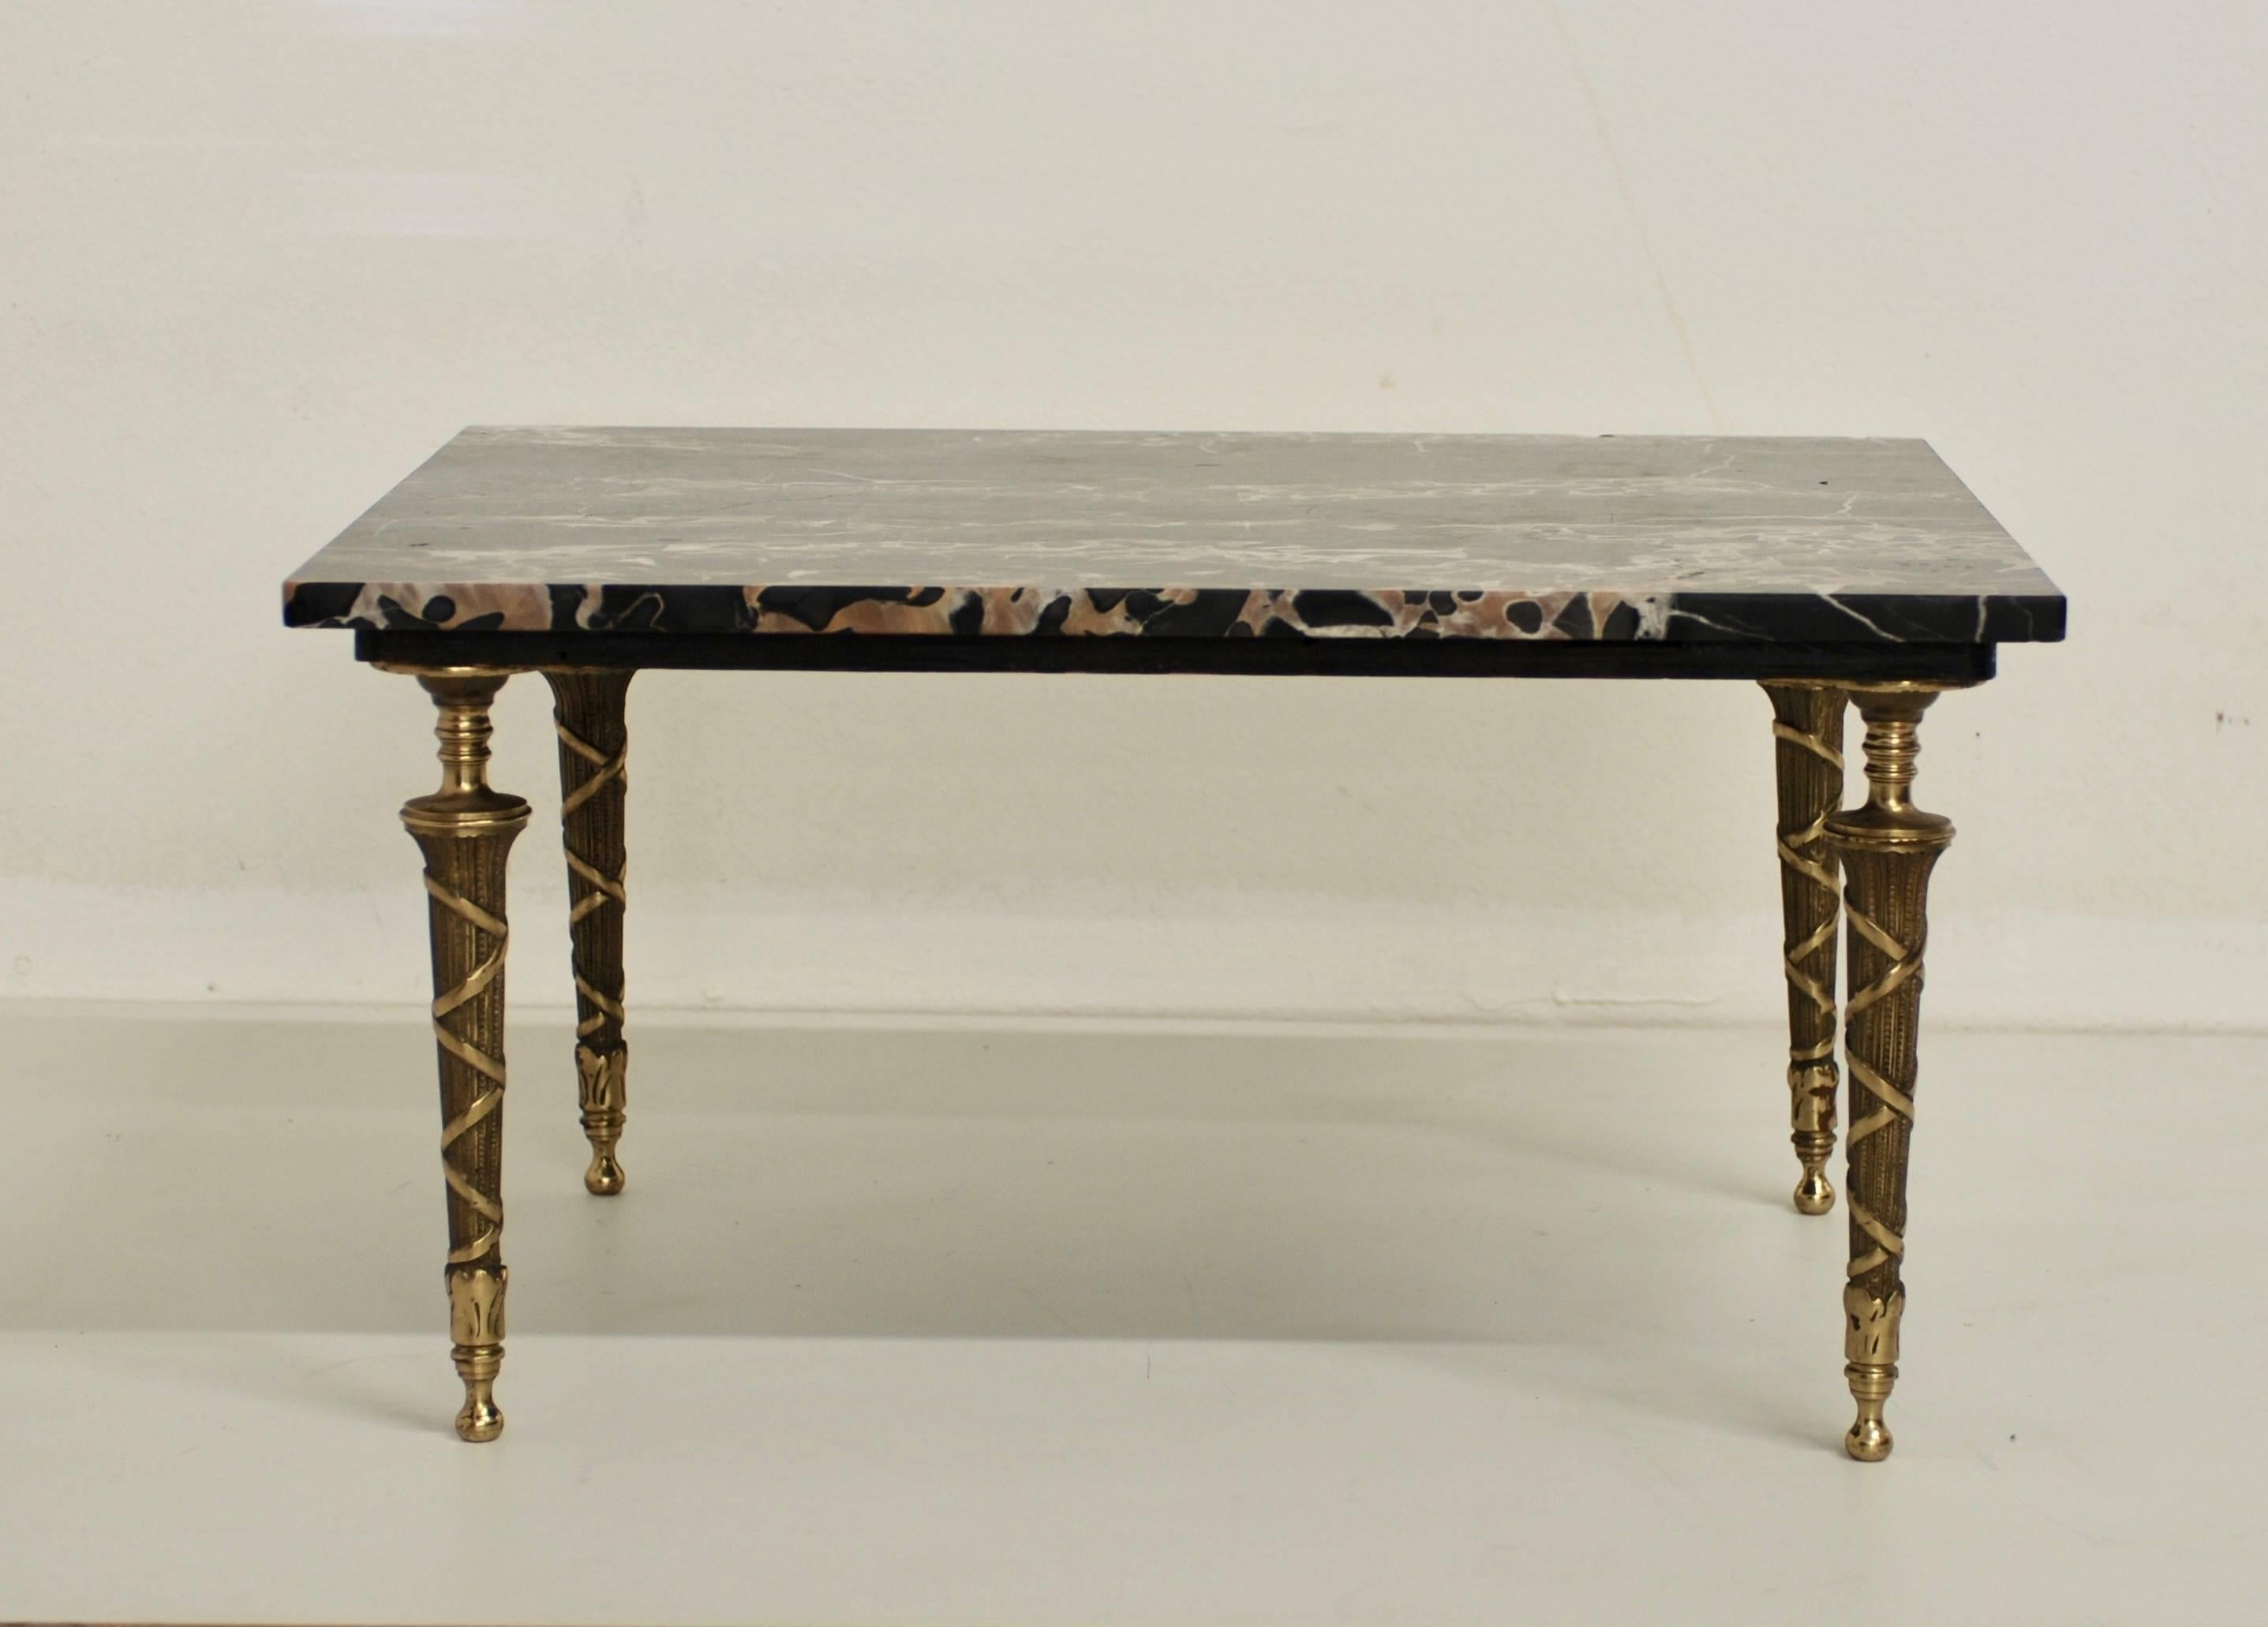 This low marble and bronze side or petite coffee table has stunning black marble with nice veining throughout. The marble sits on top of neoclassical styled bronze legs.
The marble top has been recently professionally restored and polished. 